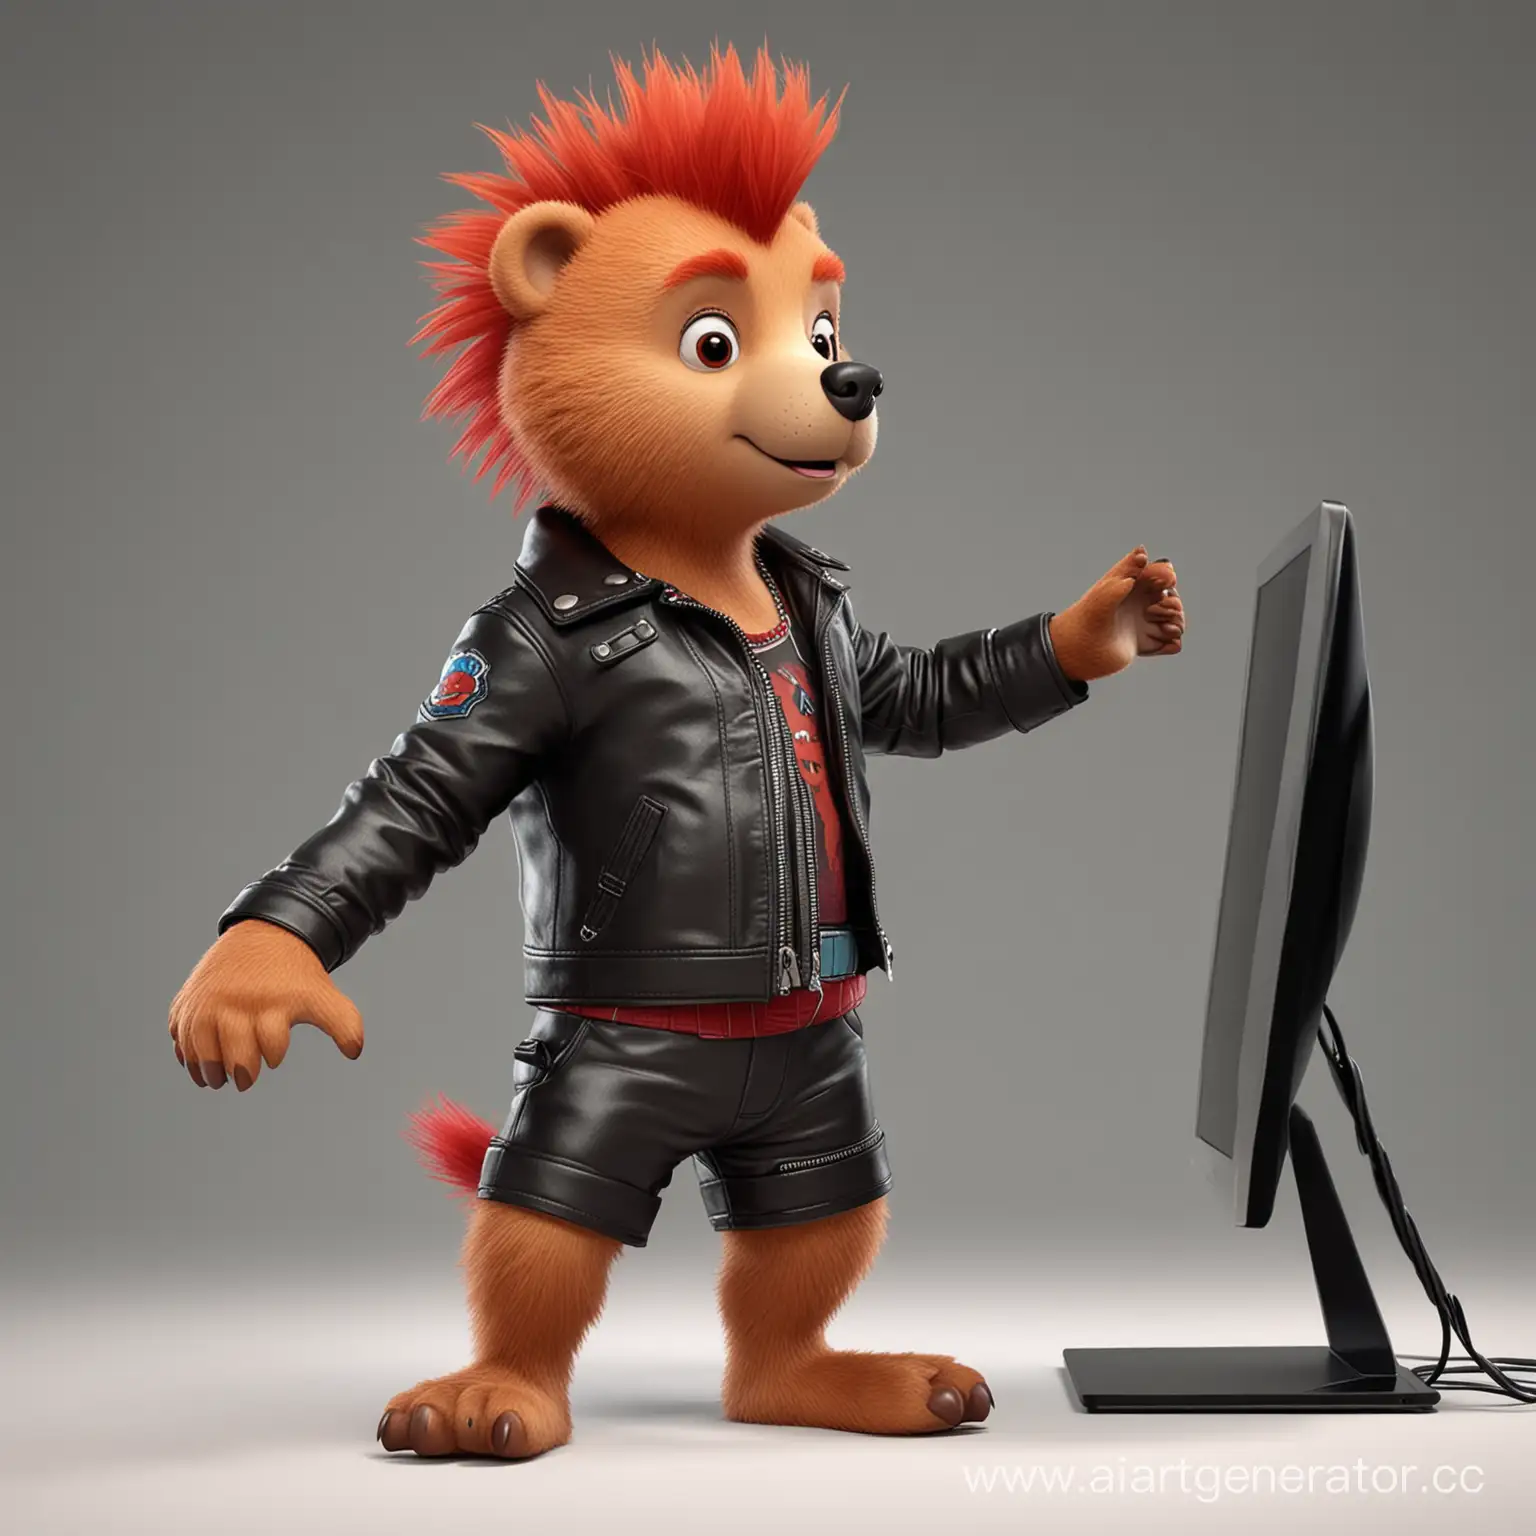 Cartoon-Bear-with-Red-Mohawk-and-Leather-Jacket-Seeks-Drawing-Inspiration